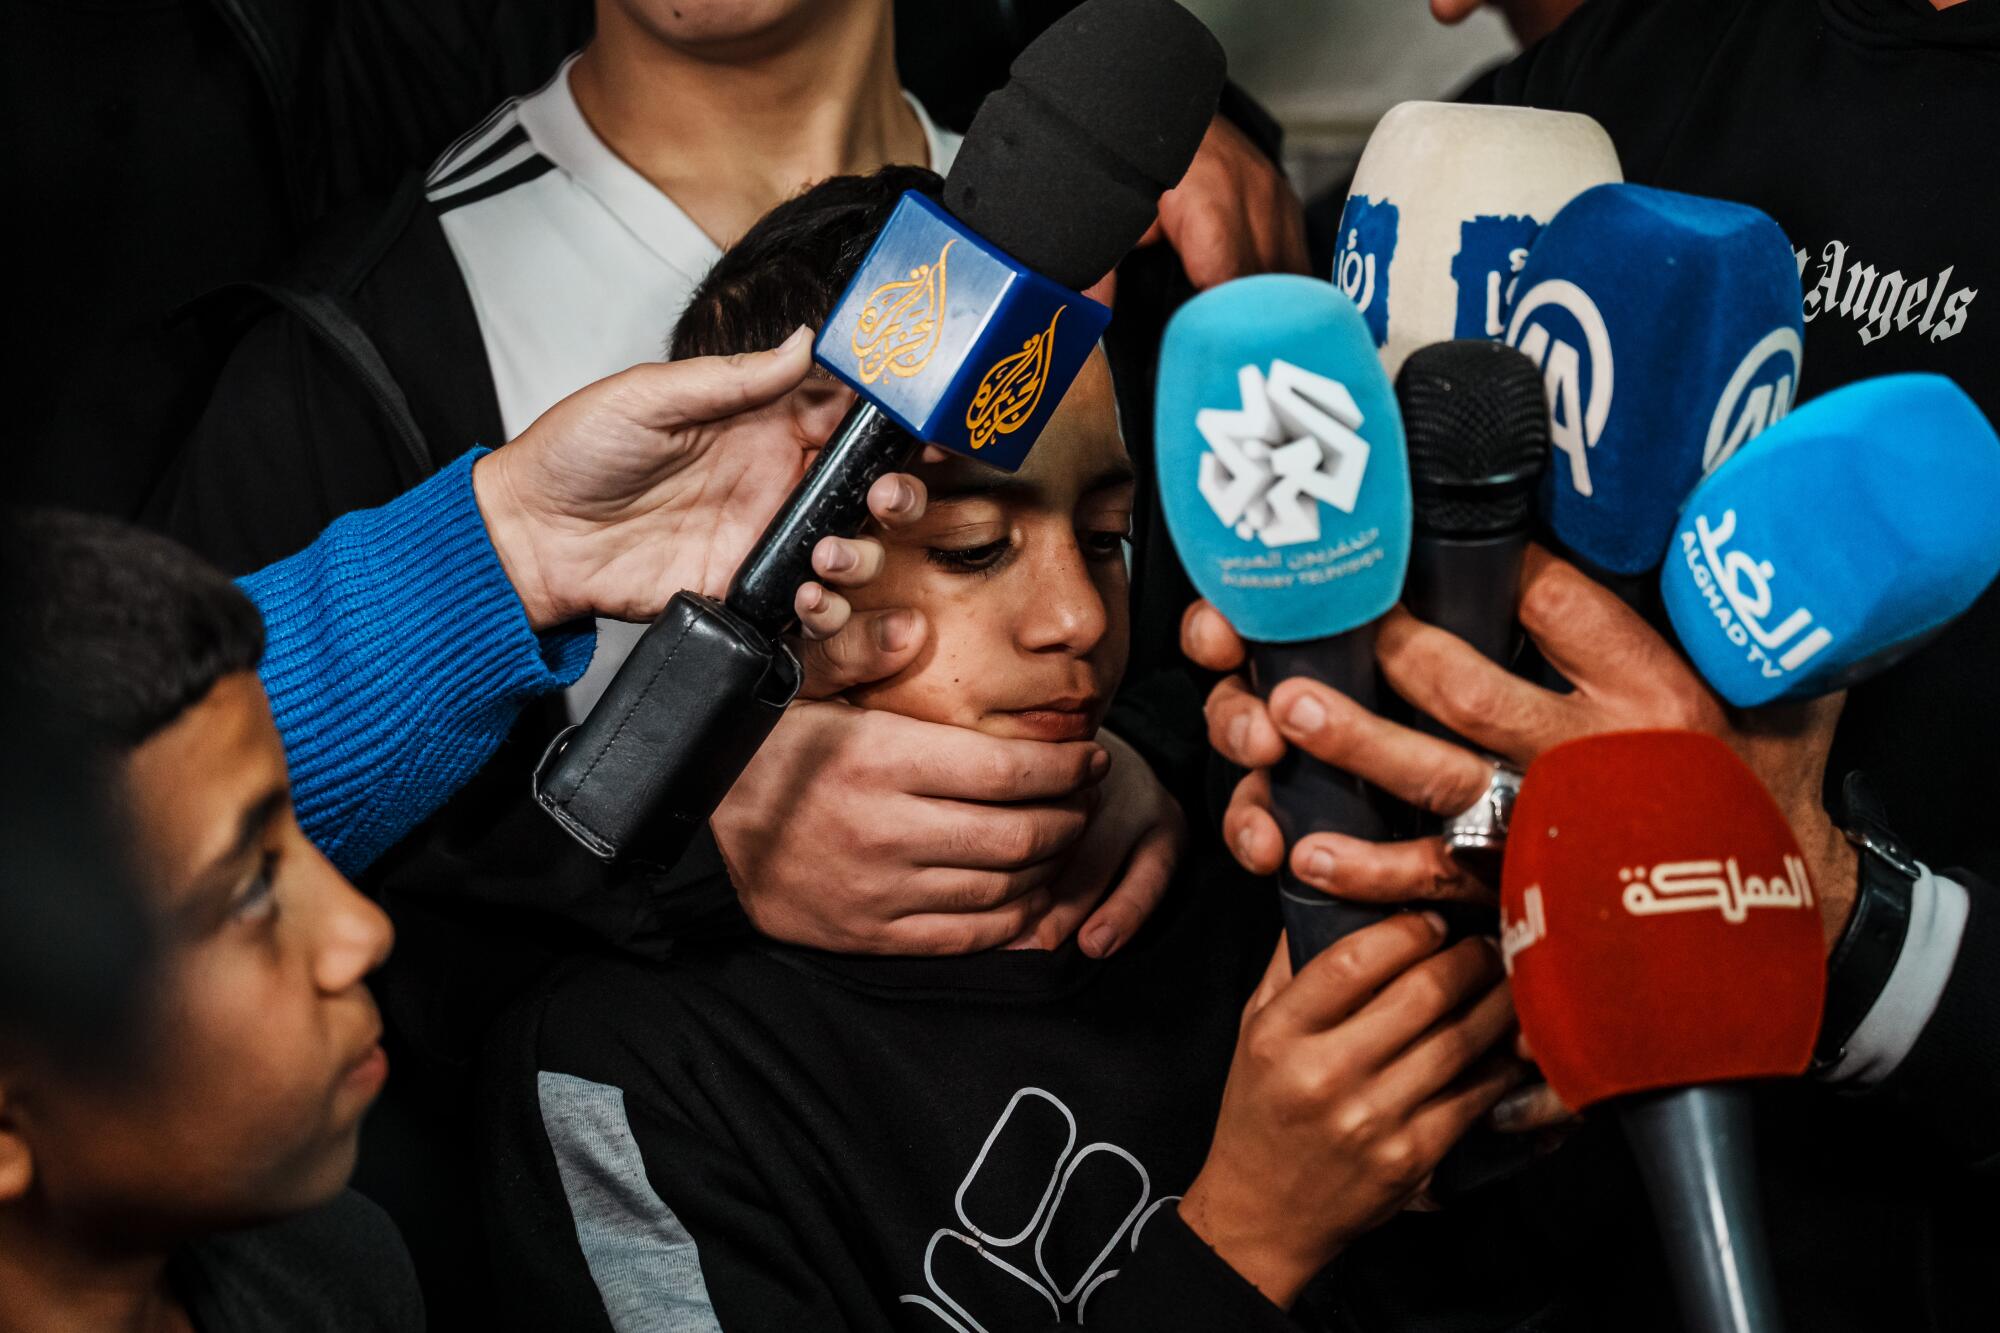 Two boys are almost hidden in a forest of microphones during a media scrum